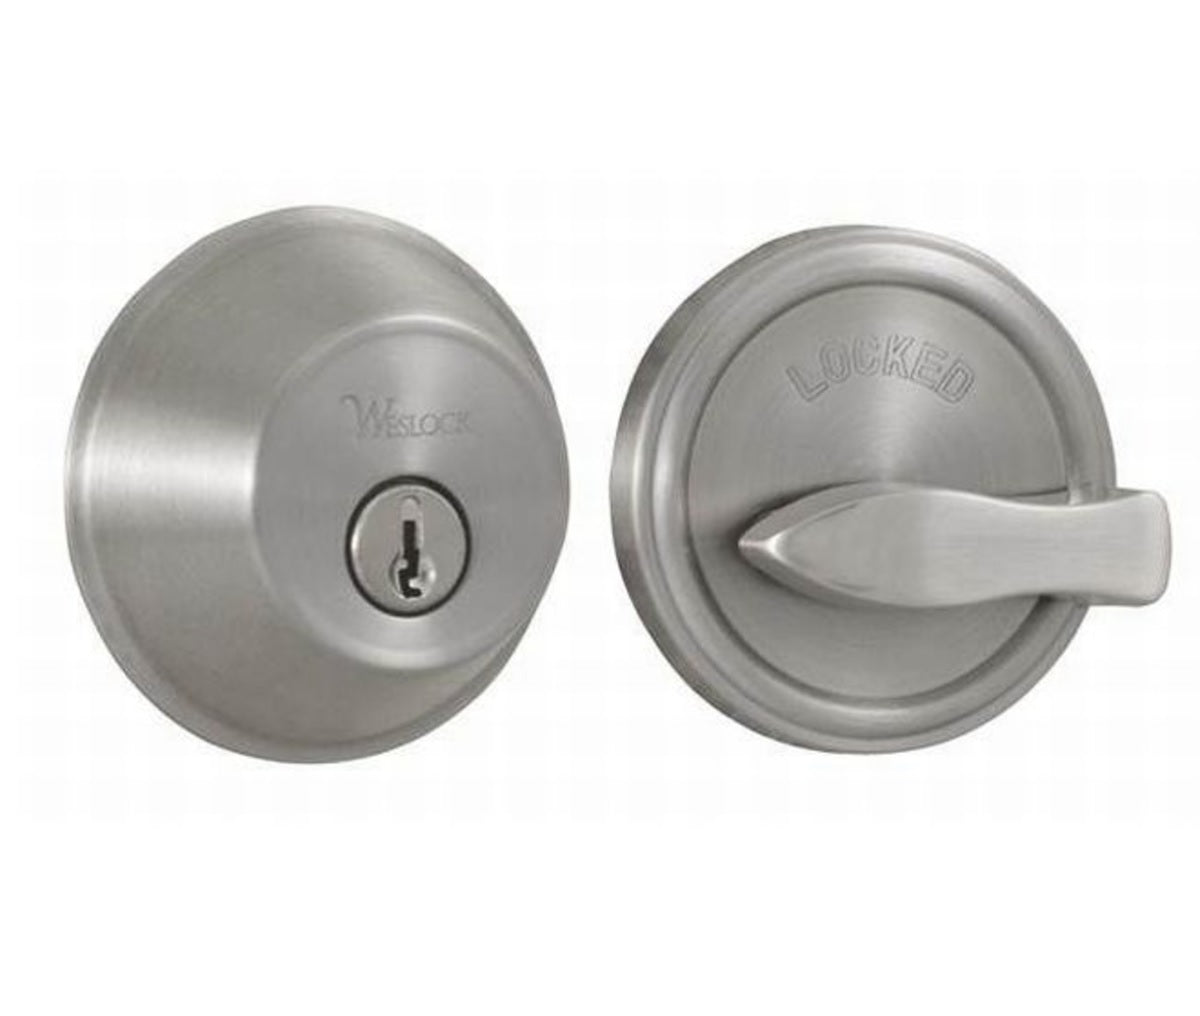 buy dead bolts locksets at cheap rate in bulk. wholesale & retail building hardware tools store. home décor ideas, maintenance, repair replacement parts